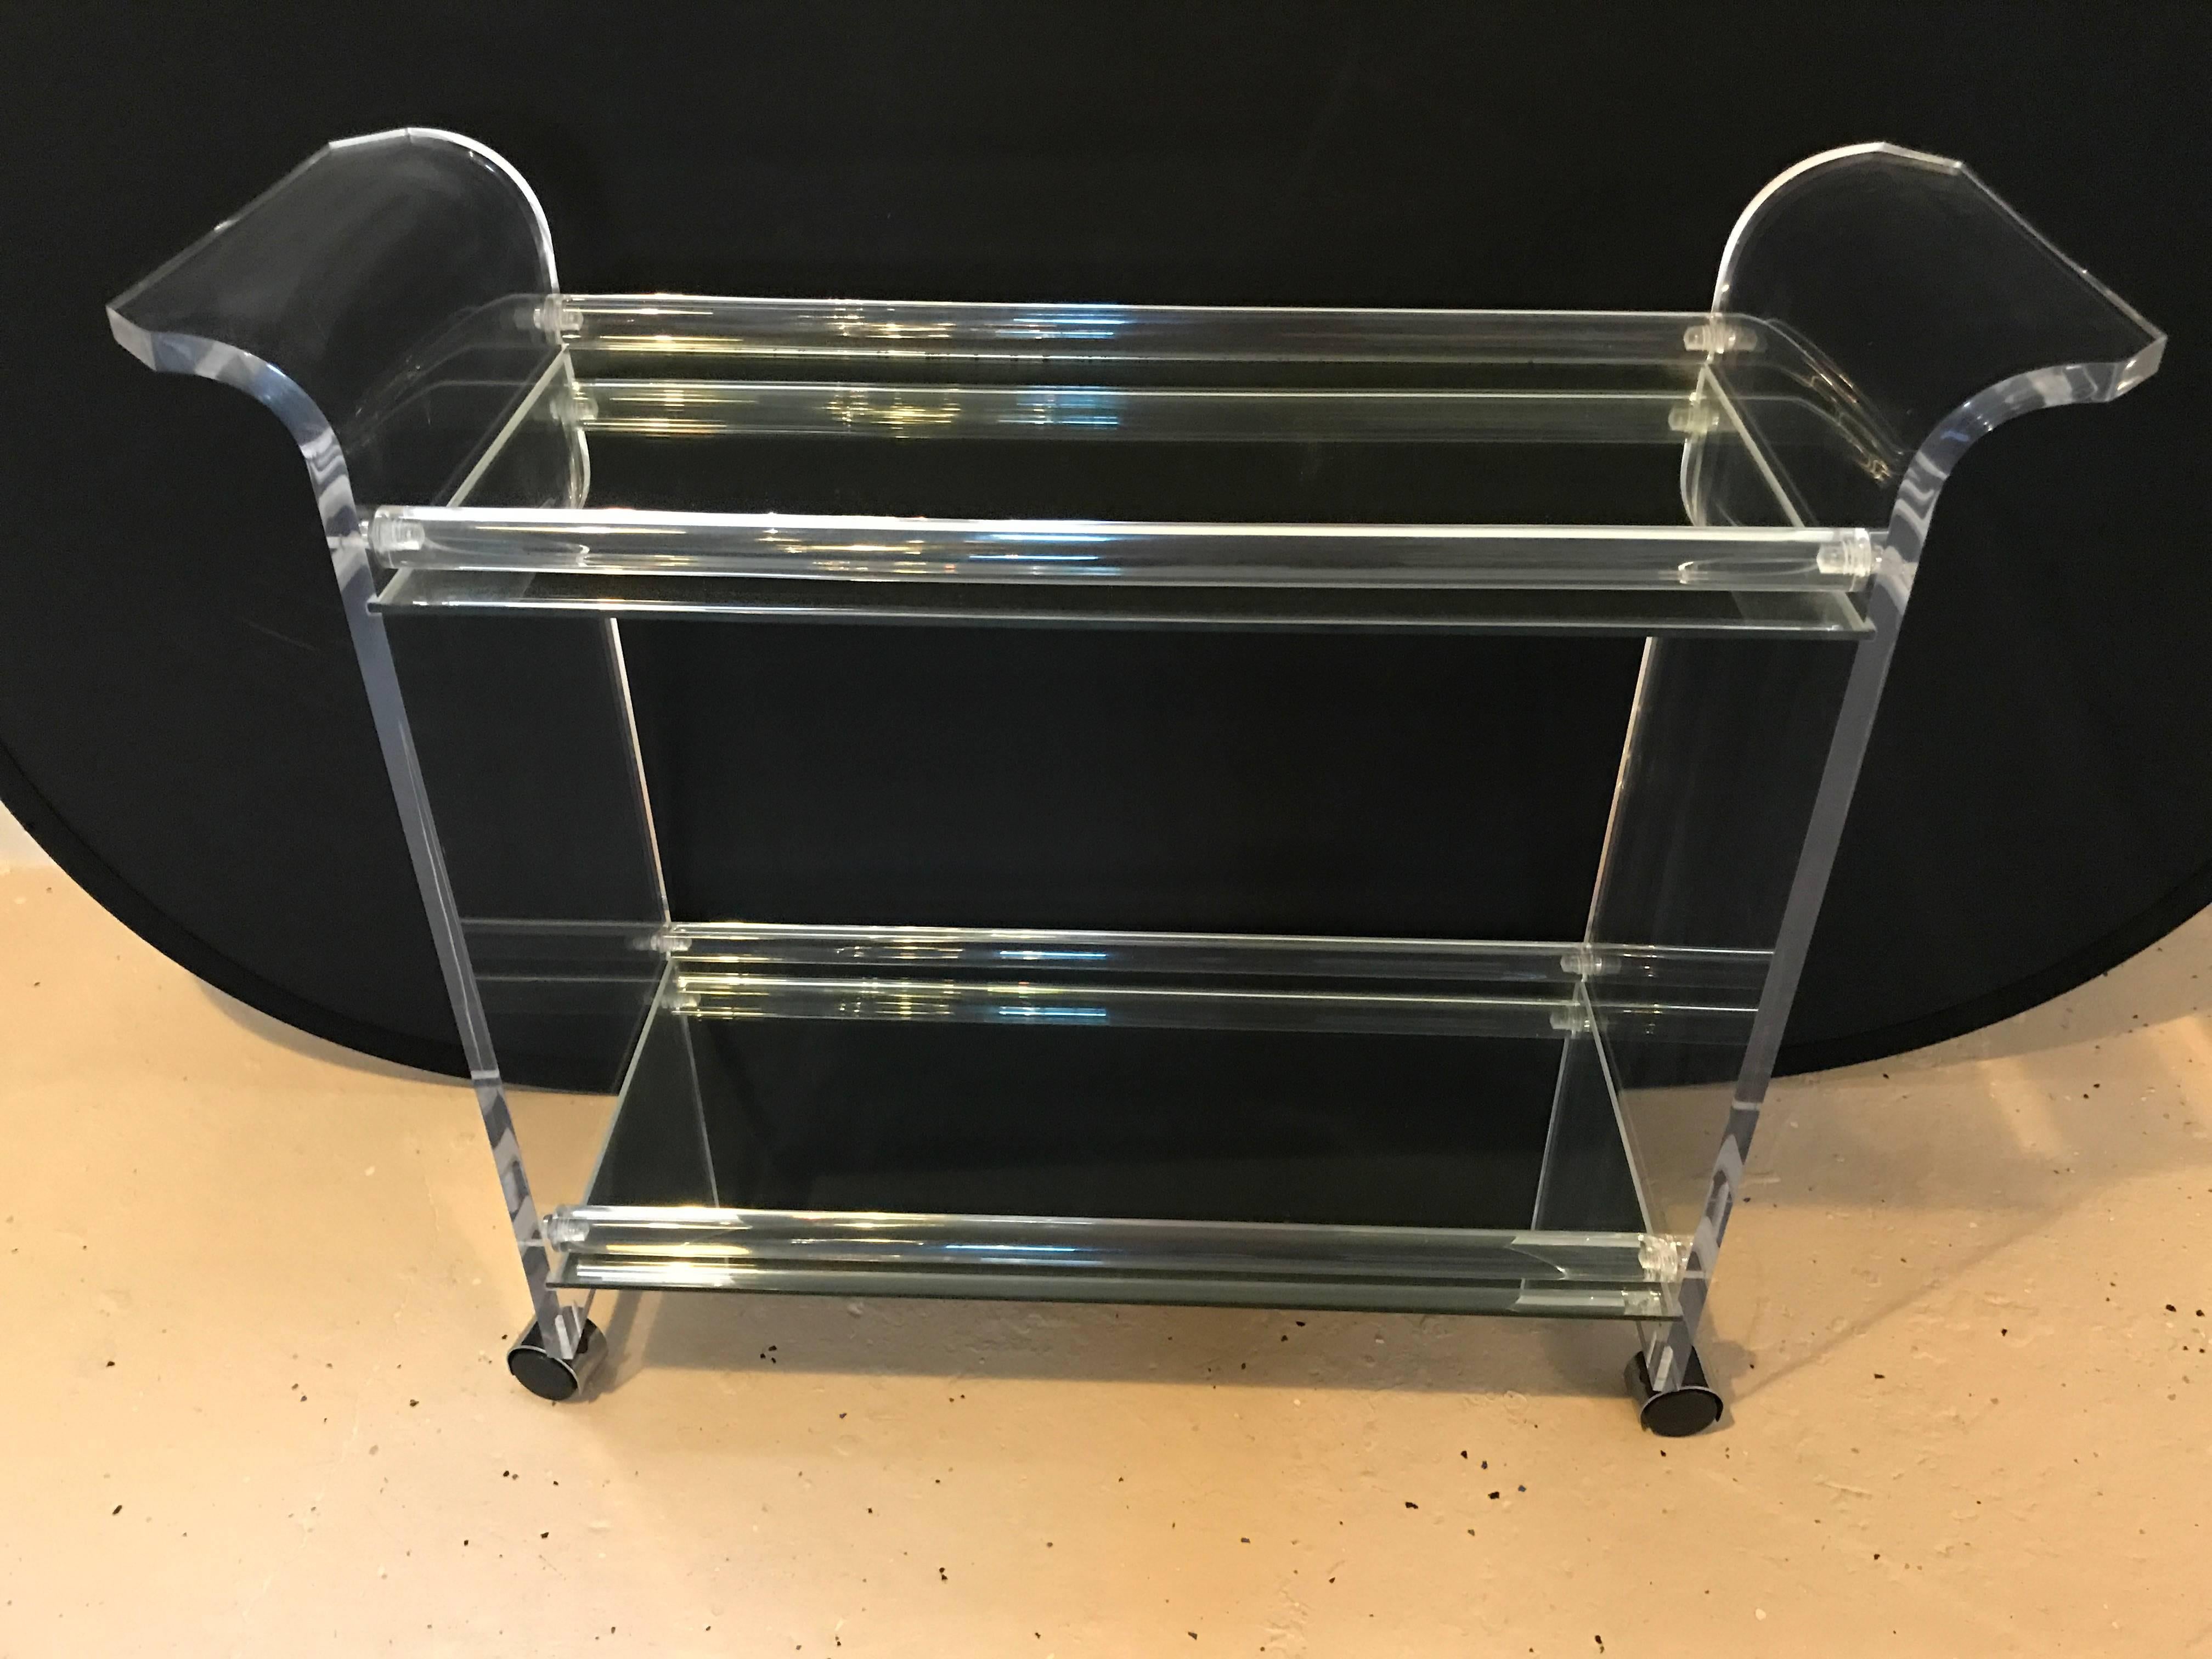 Two-Tier Lucite and mirror rolling bar cart or serving table. This highly functional cart sits on casters which glide easily across the floor with a lower and upper mirrored top shelf supporting by curved thick Lucite sides.